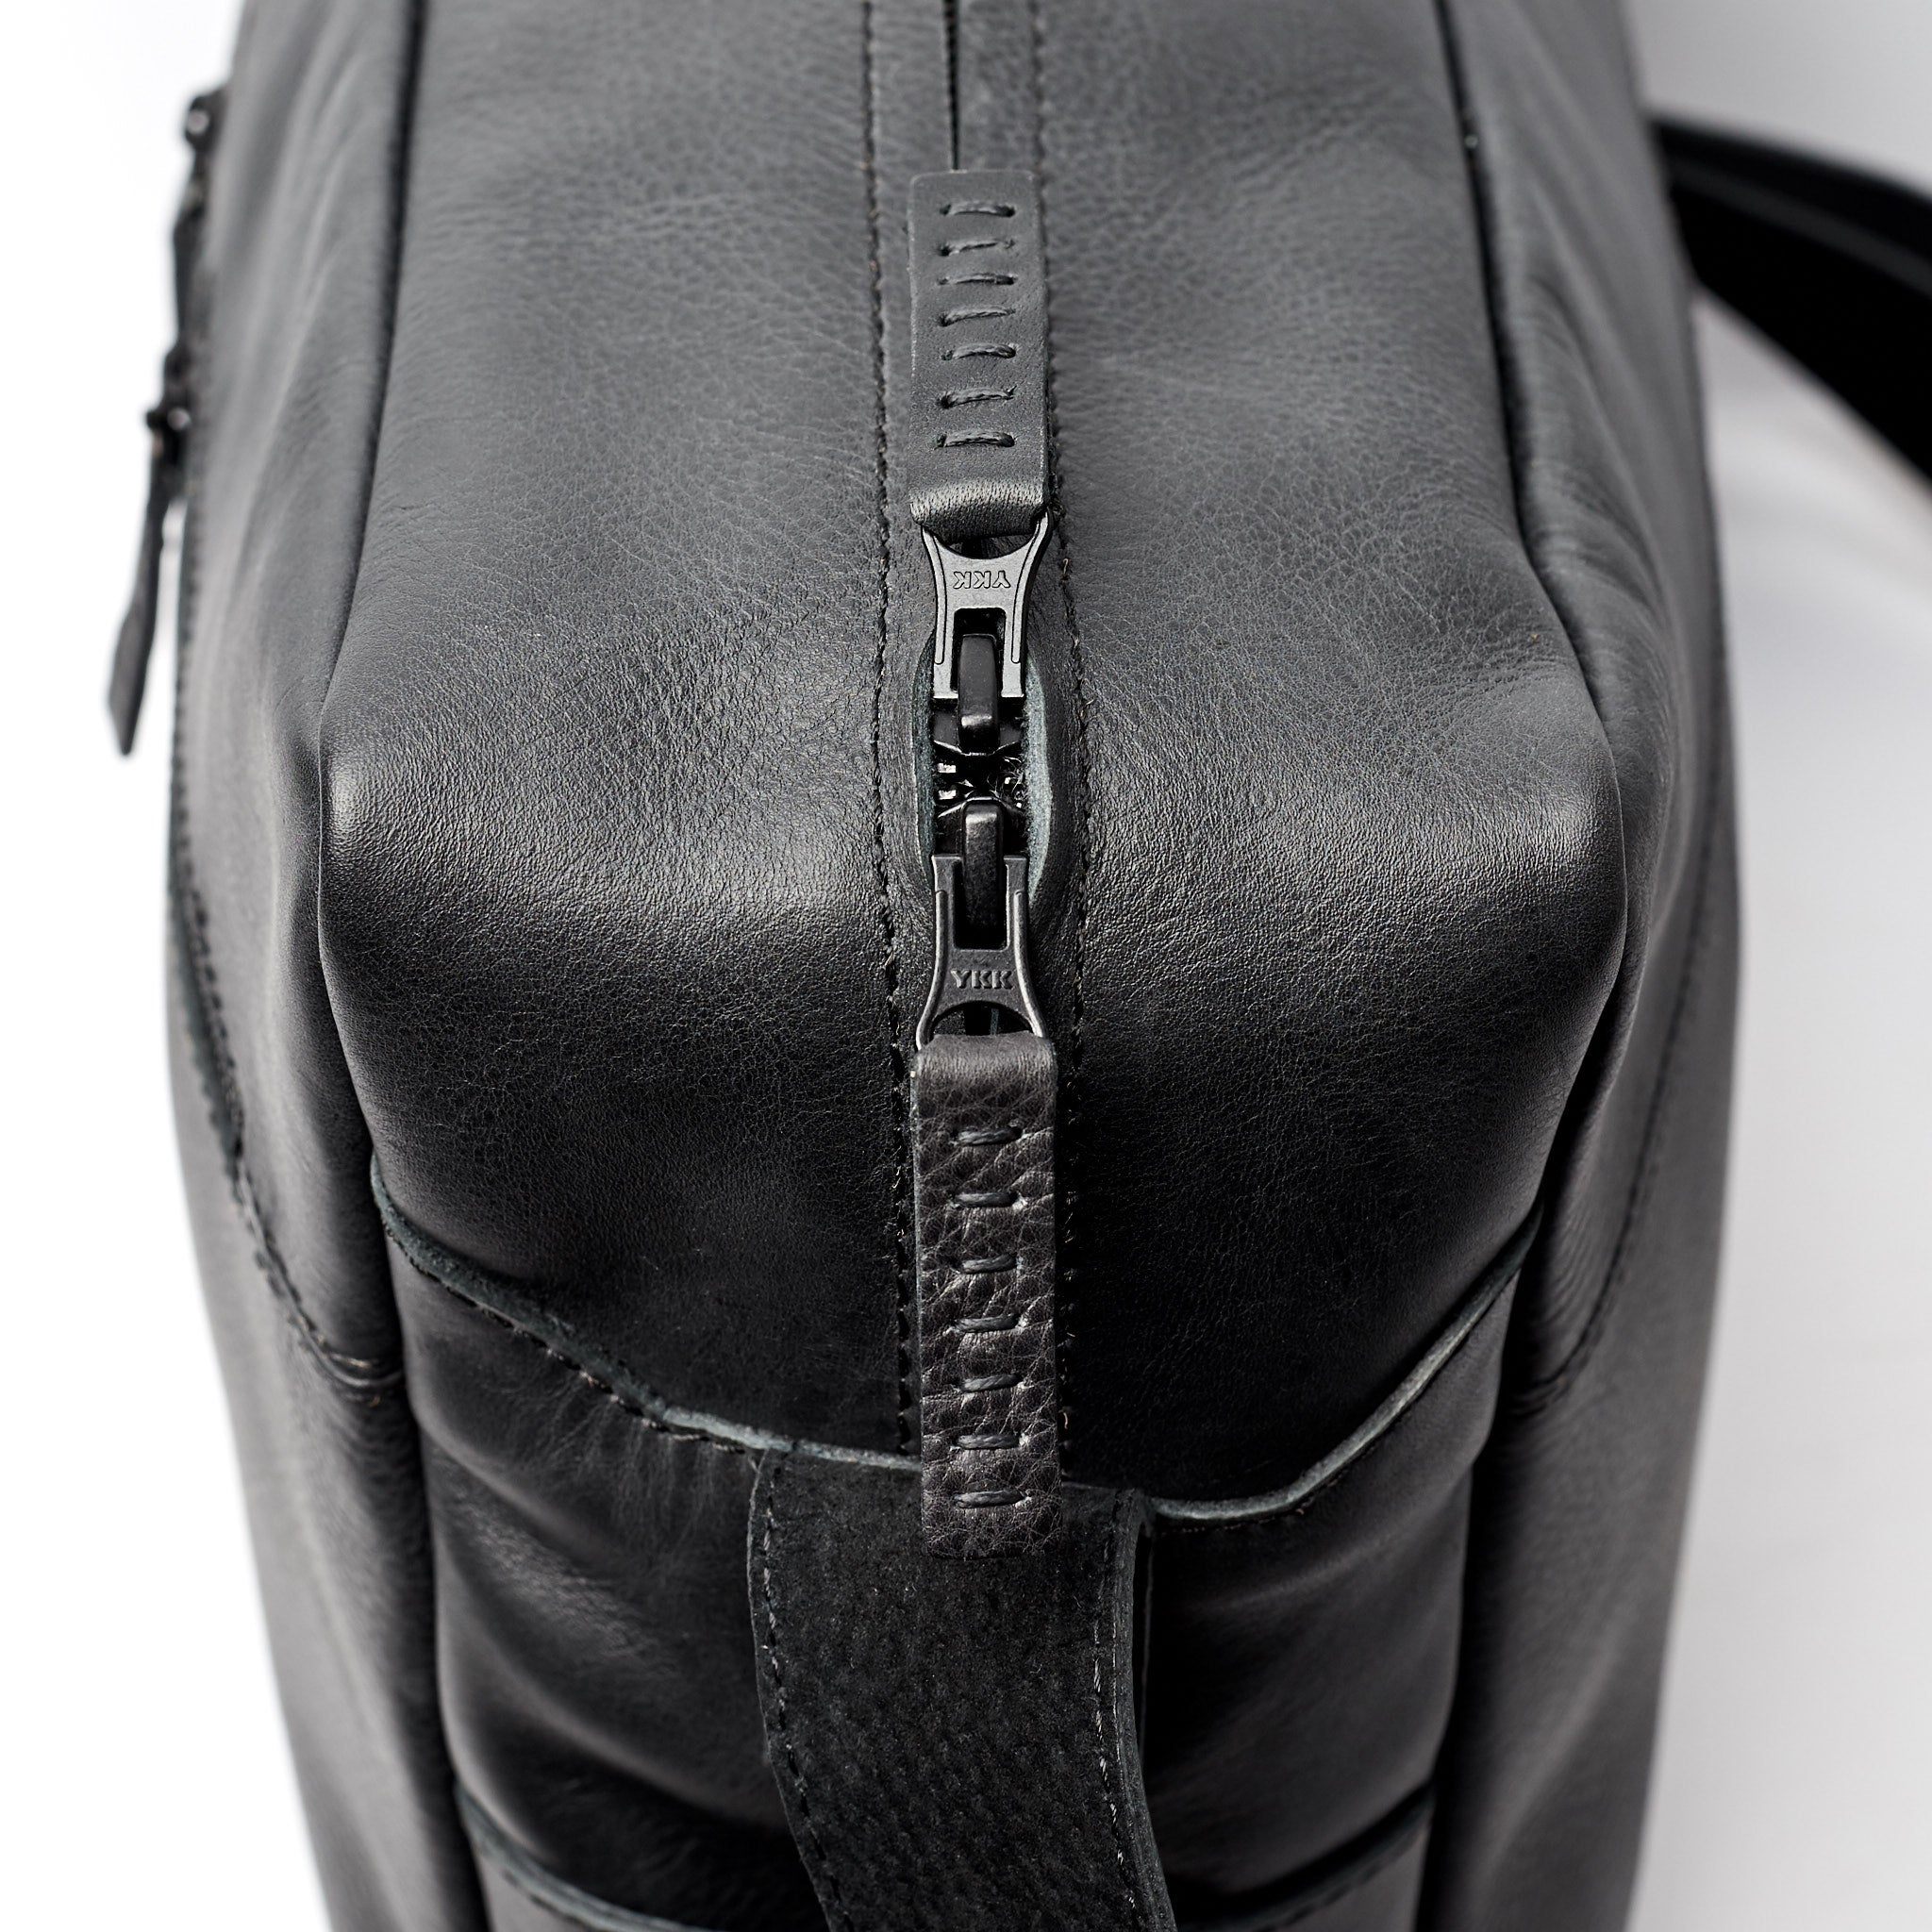 Addox Messenger Bag Size Guide by Capra Leather